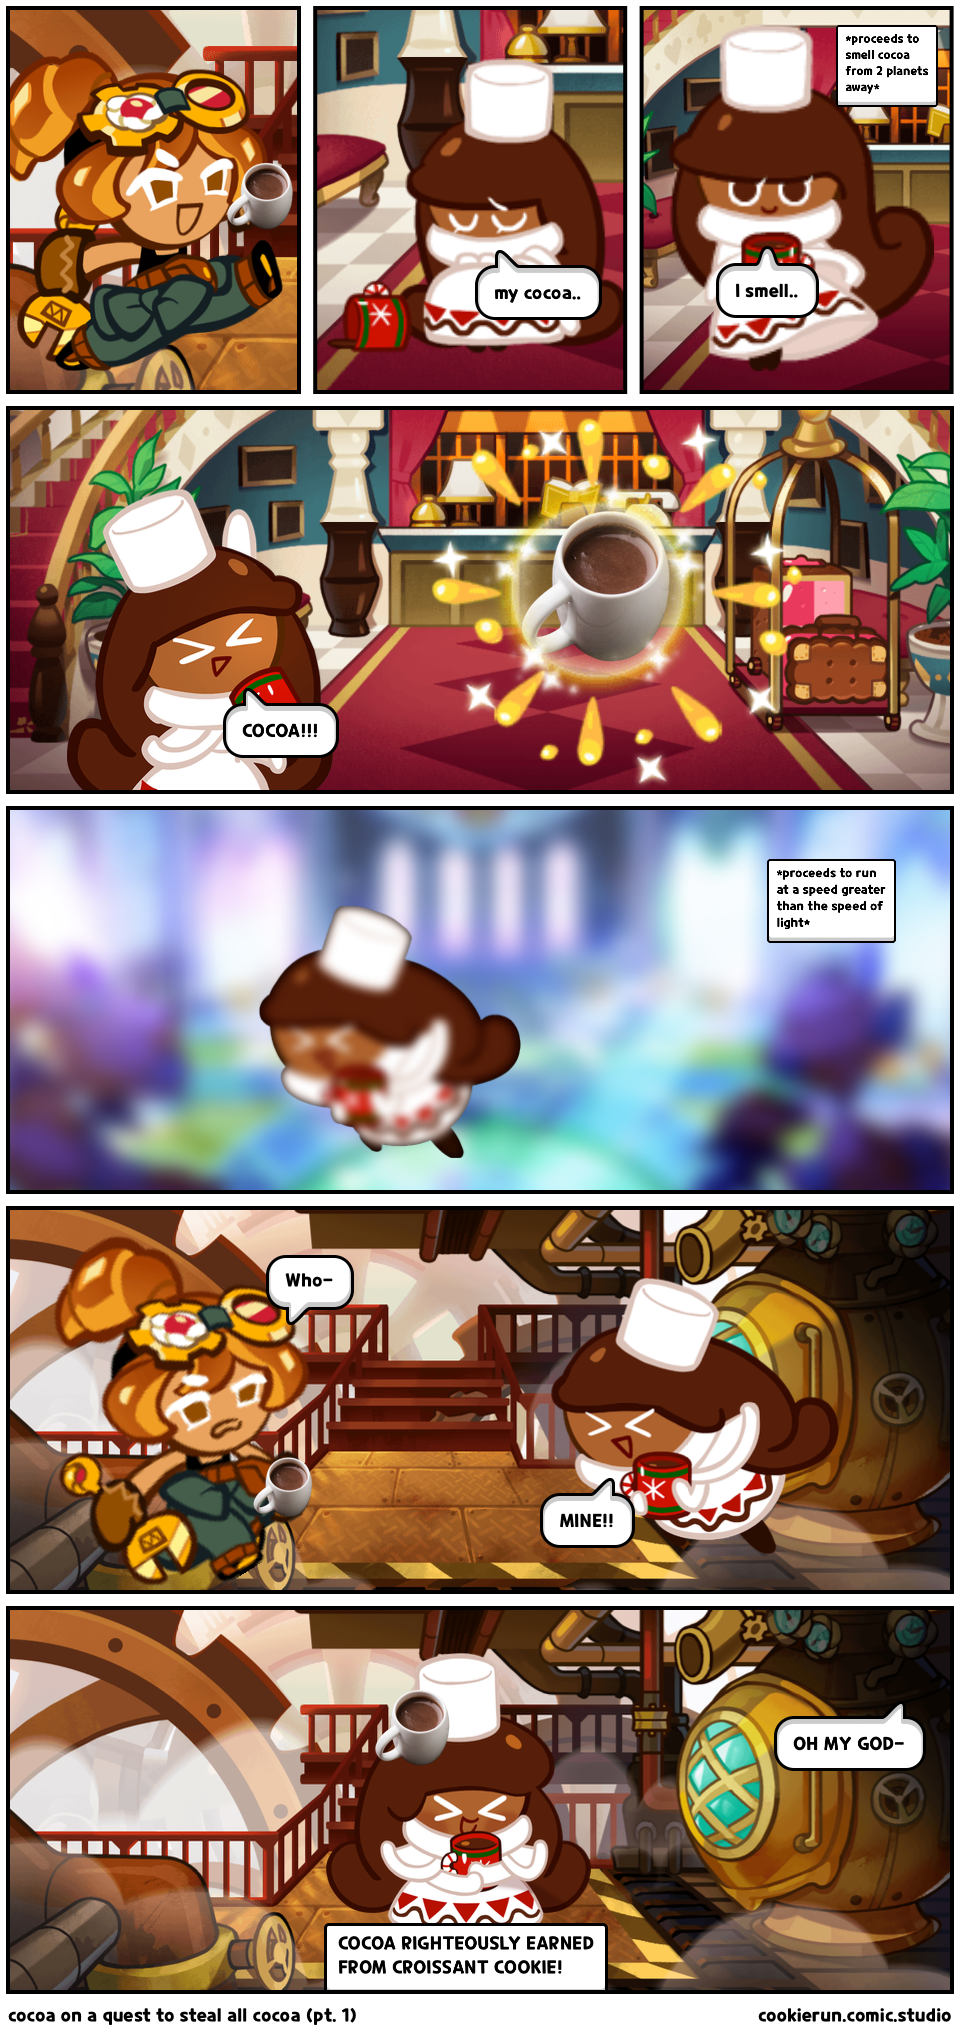 cocoa on a quest to steal all cocoa (pt. 1)